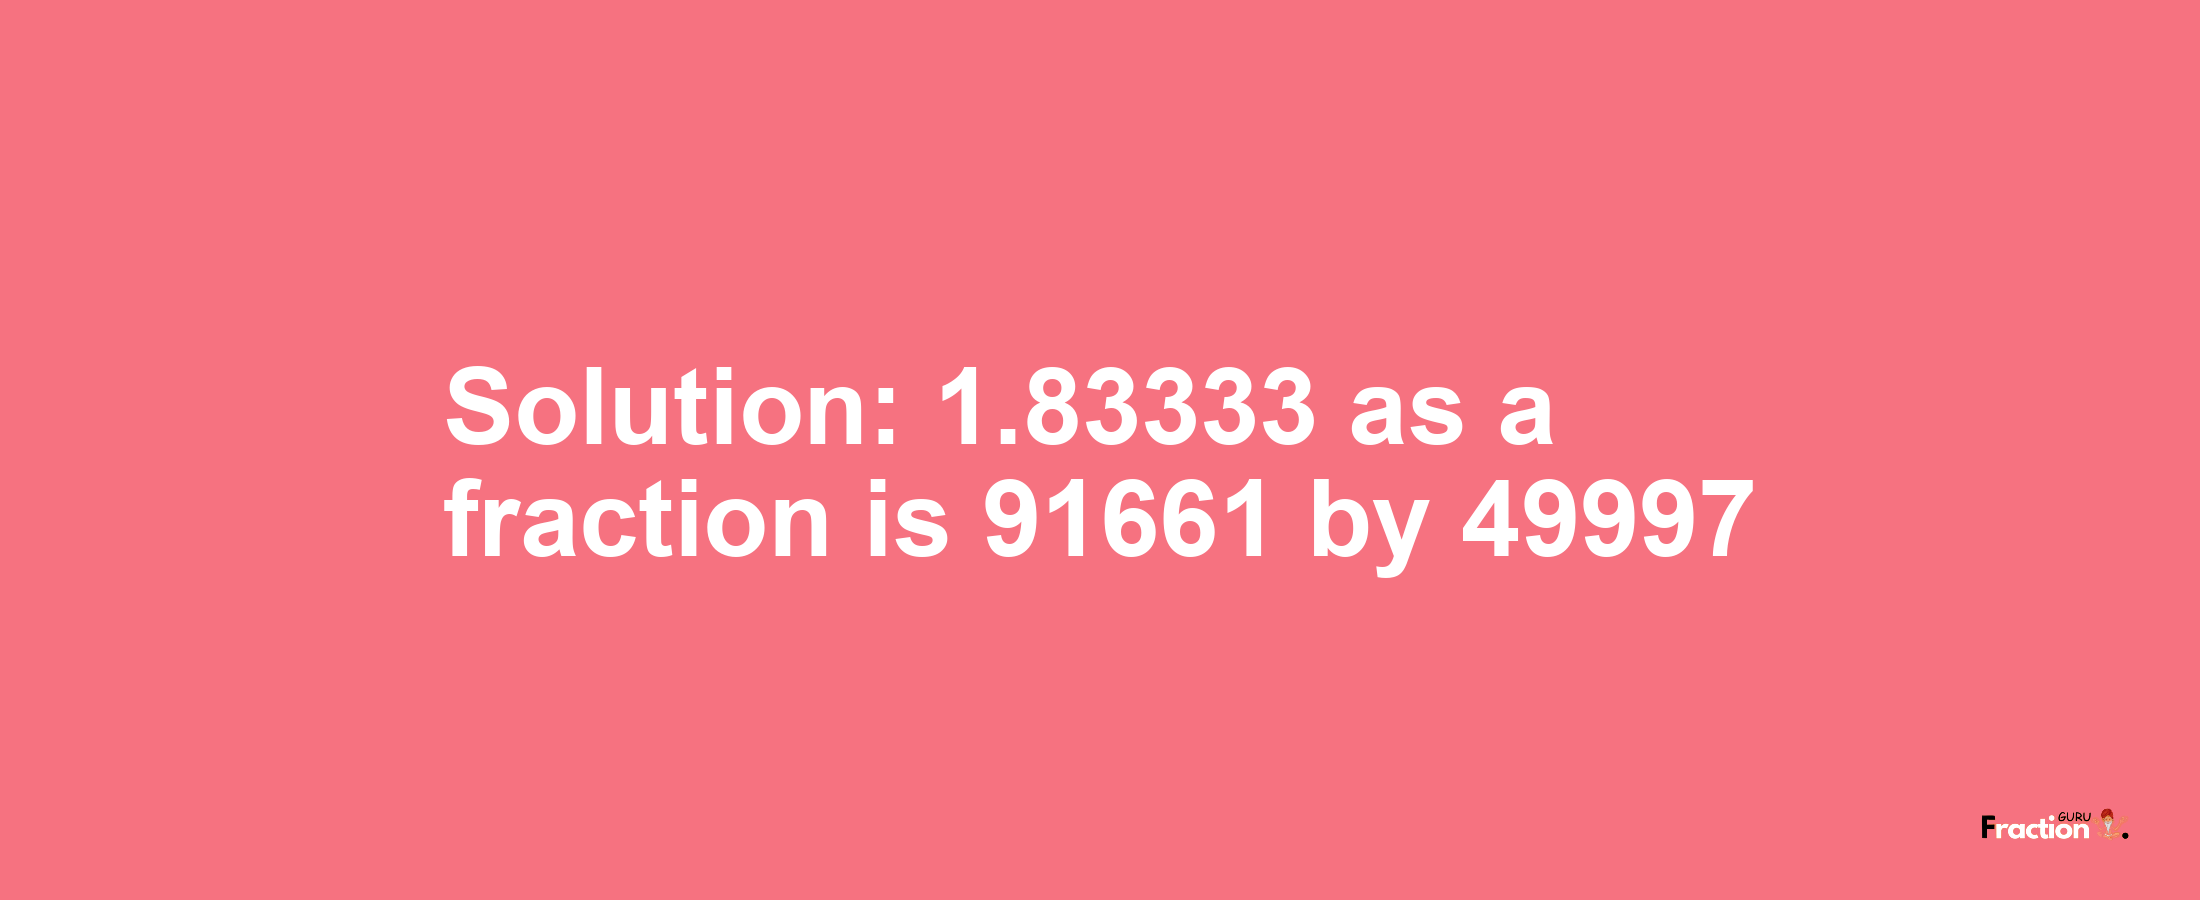 Solution:1.83333 as a fraction is 91661/49997